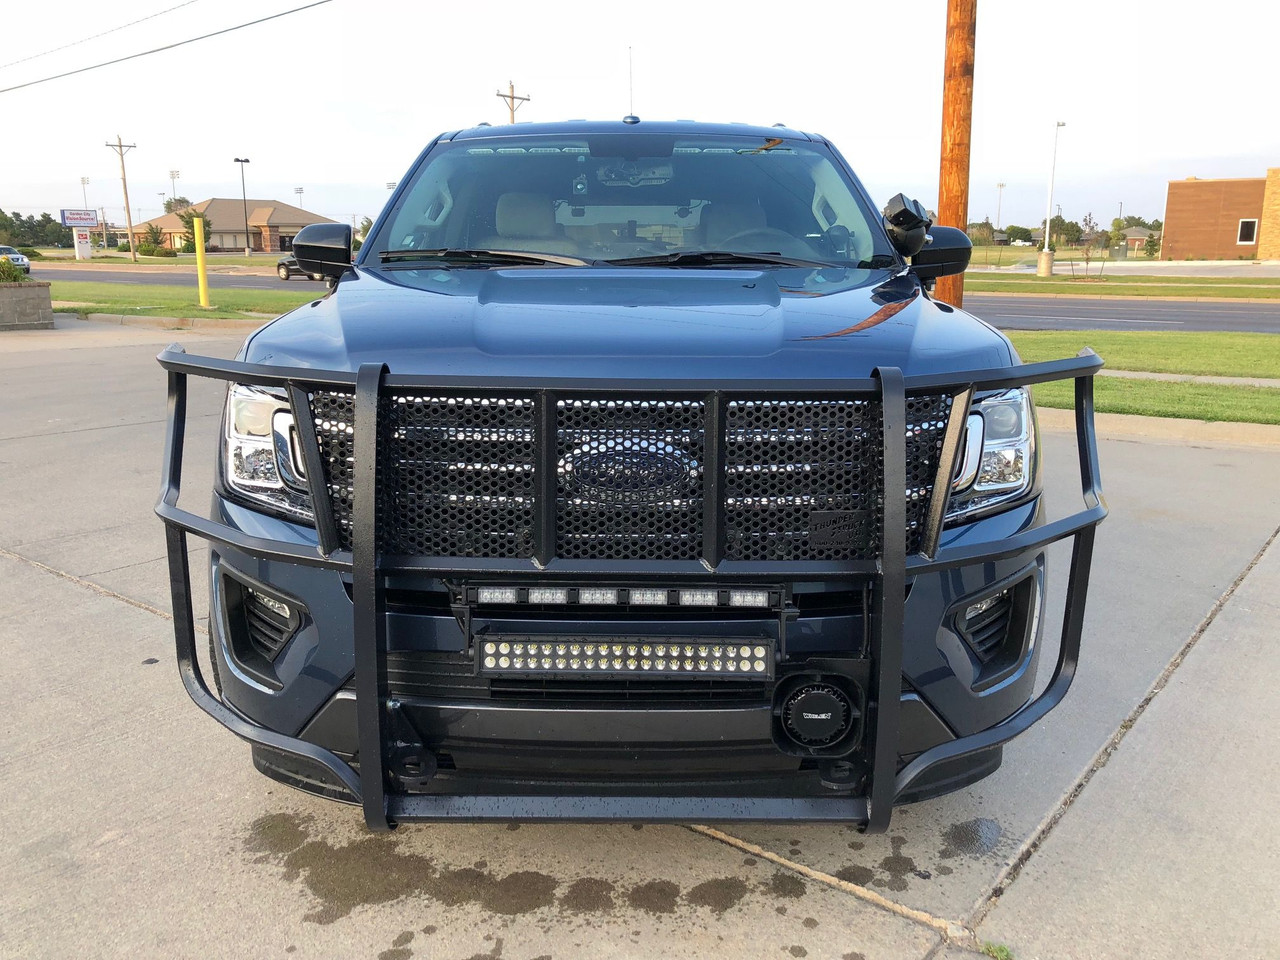 Thunder Struck FEX18-100 Grille Guard Compatible with Ford Expedition 2018-2020